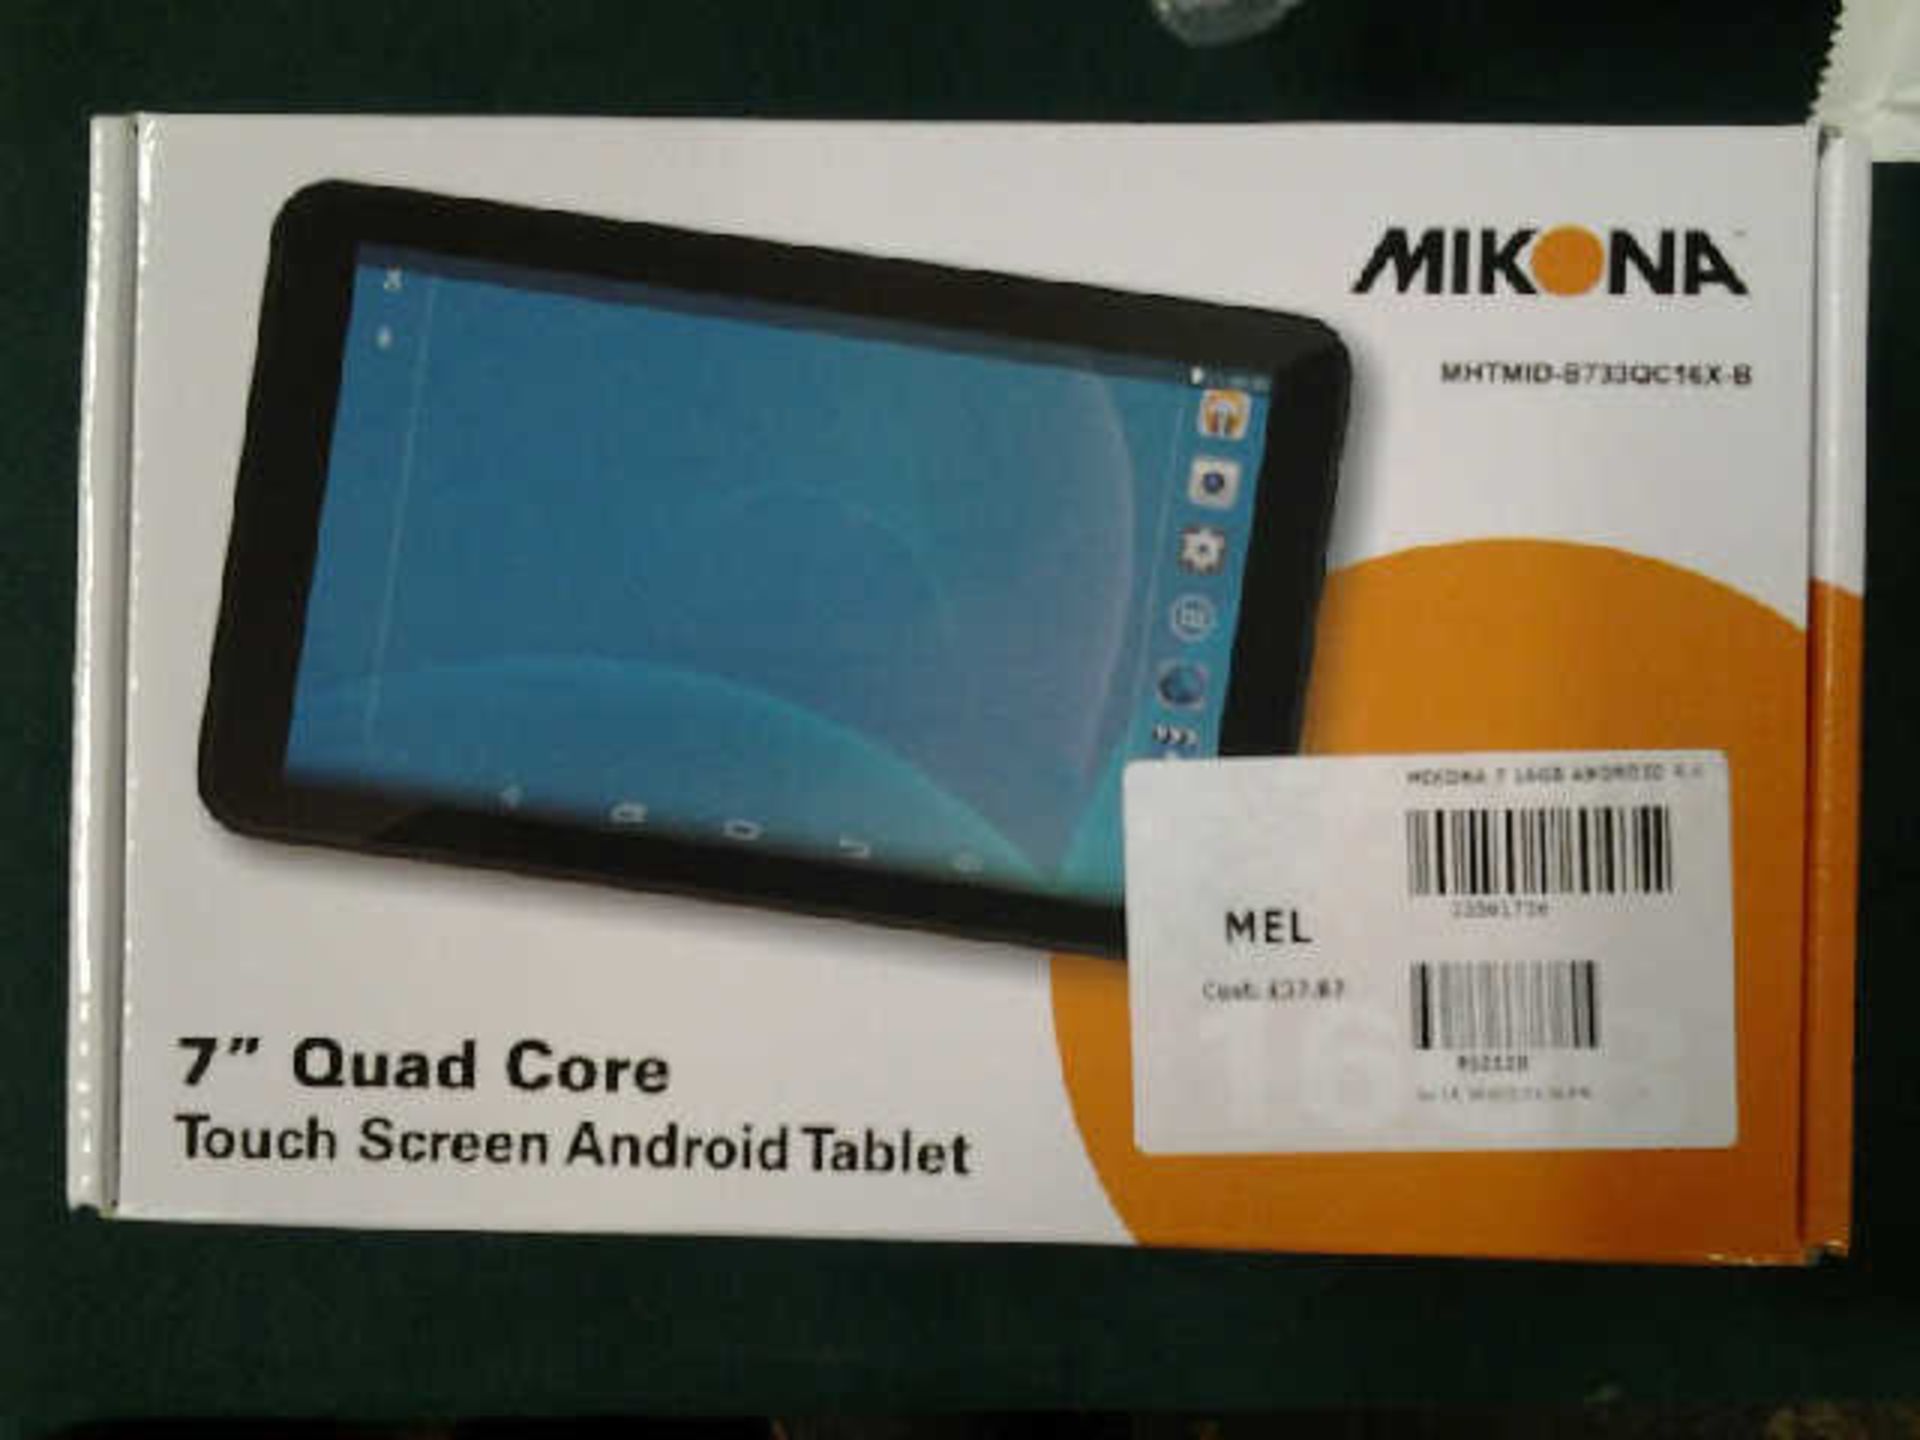 2 BOXED MIKONA 7" 16GB TOUCH-SCREEN ANDROID TABLETS.